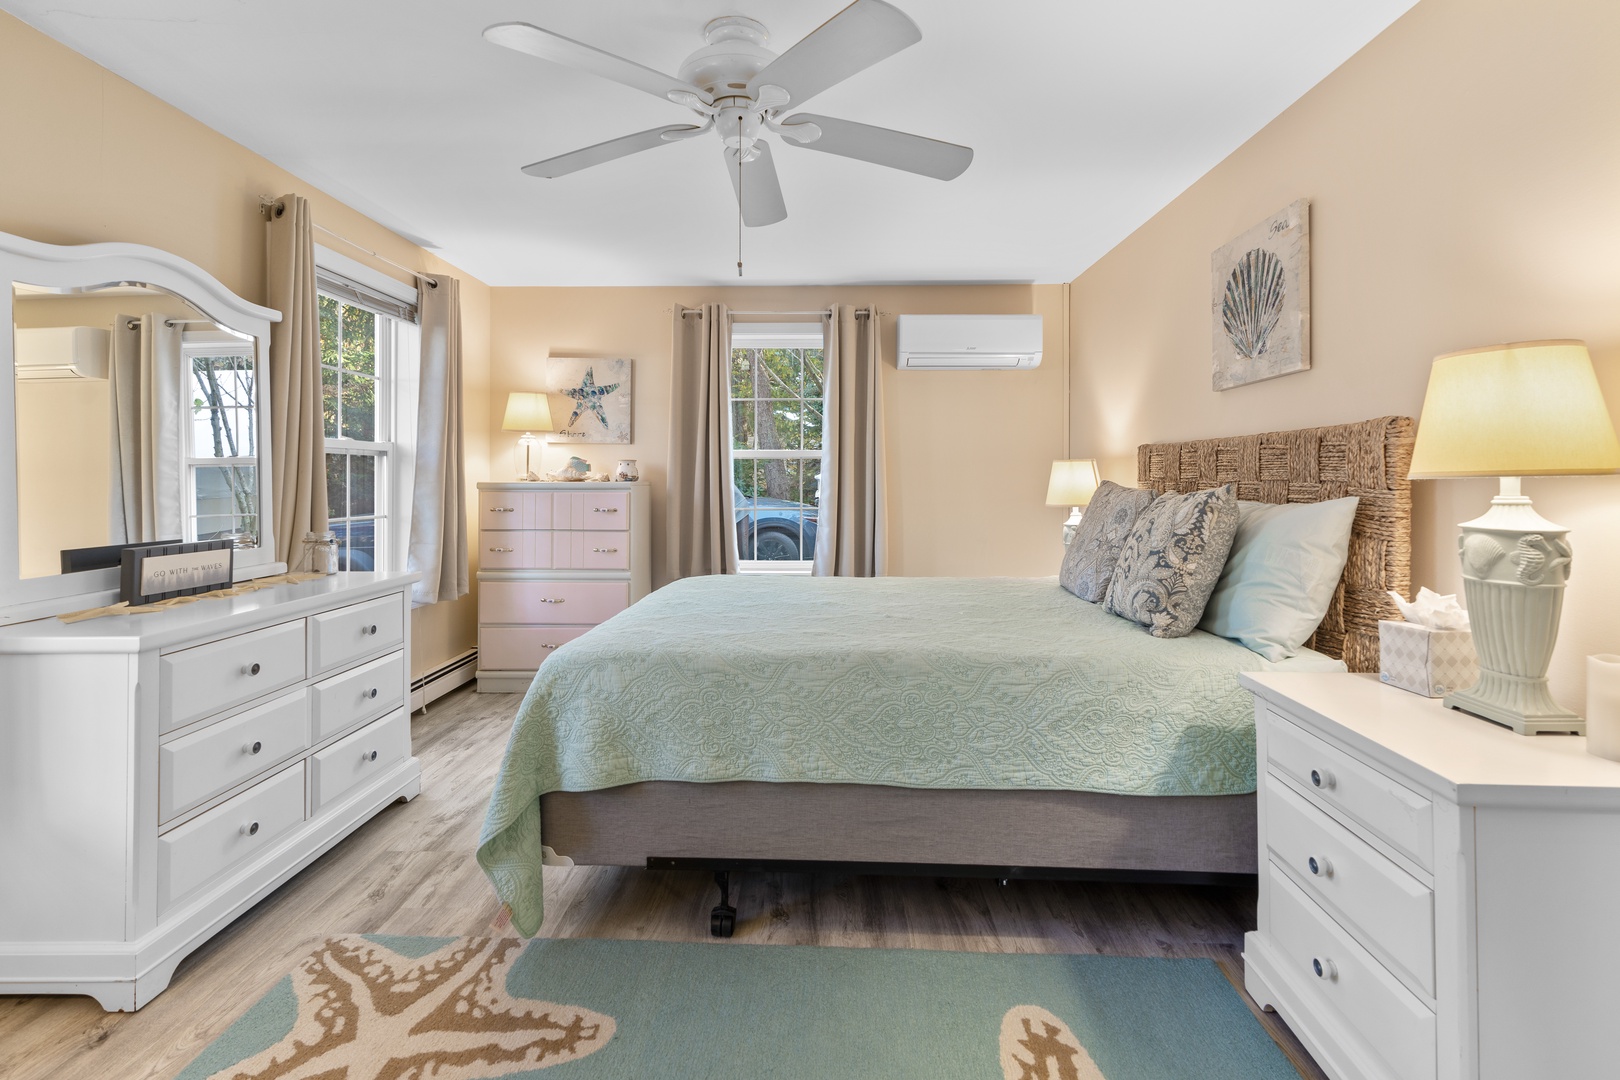 This 2nd floor bedroom offers a queen bed, desk workspace, & ceiling fan